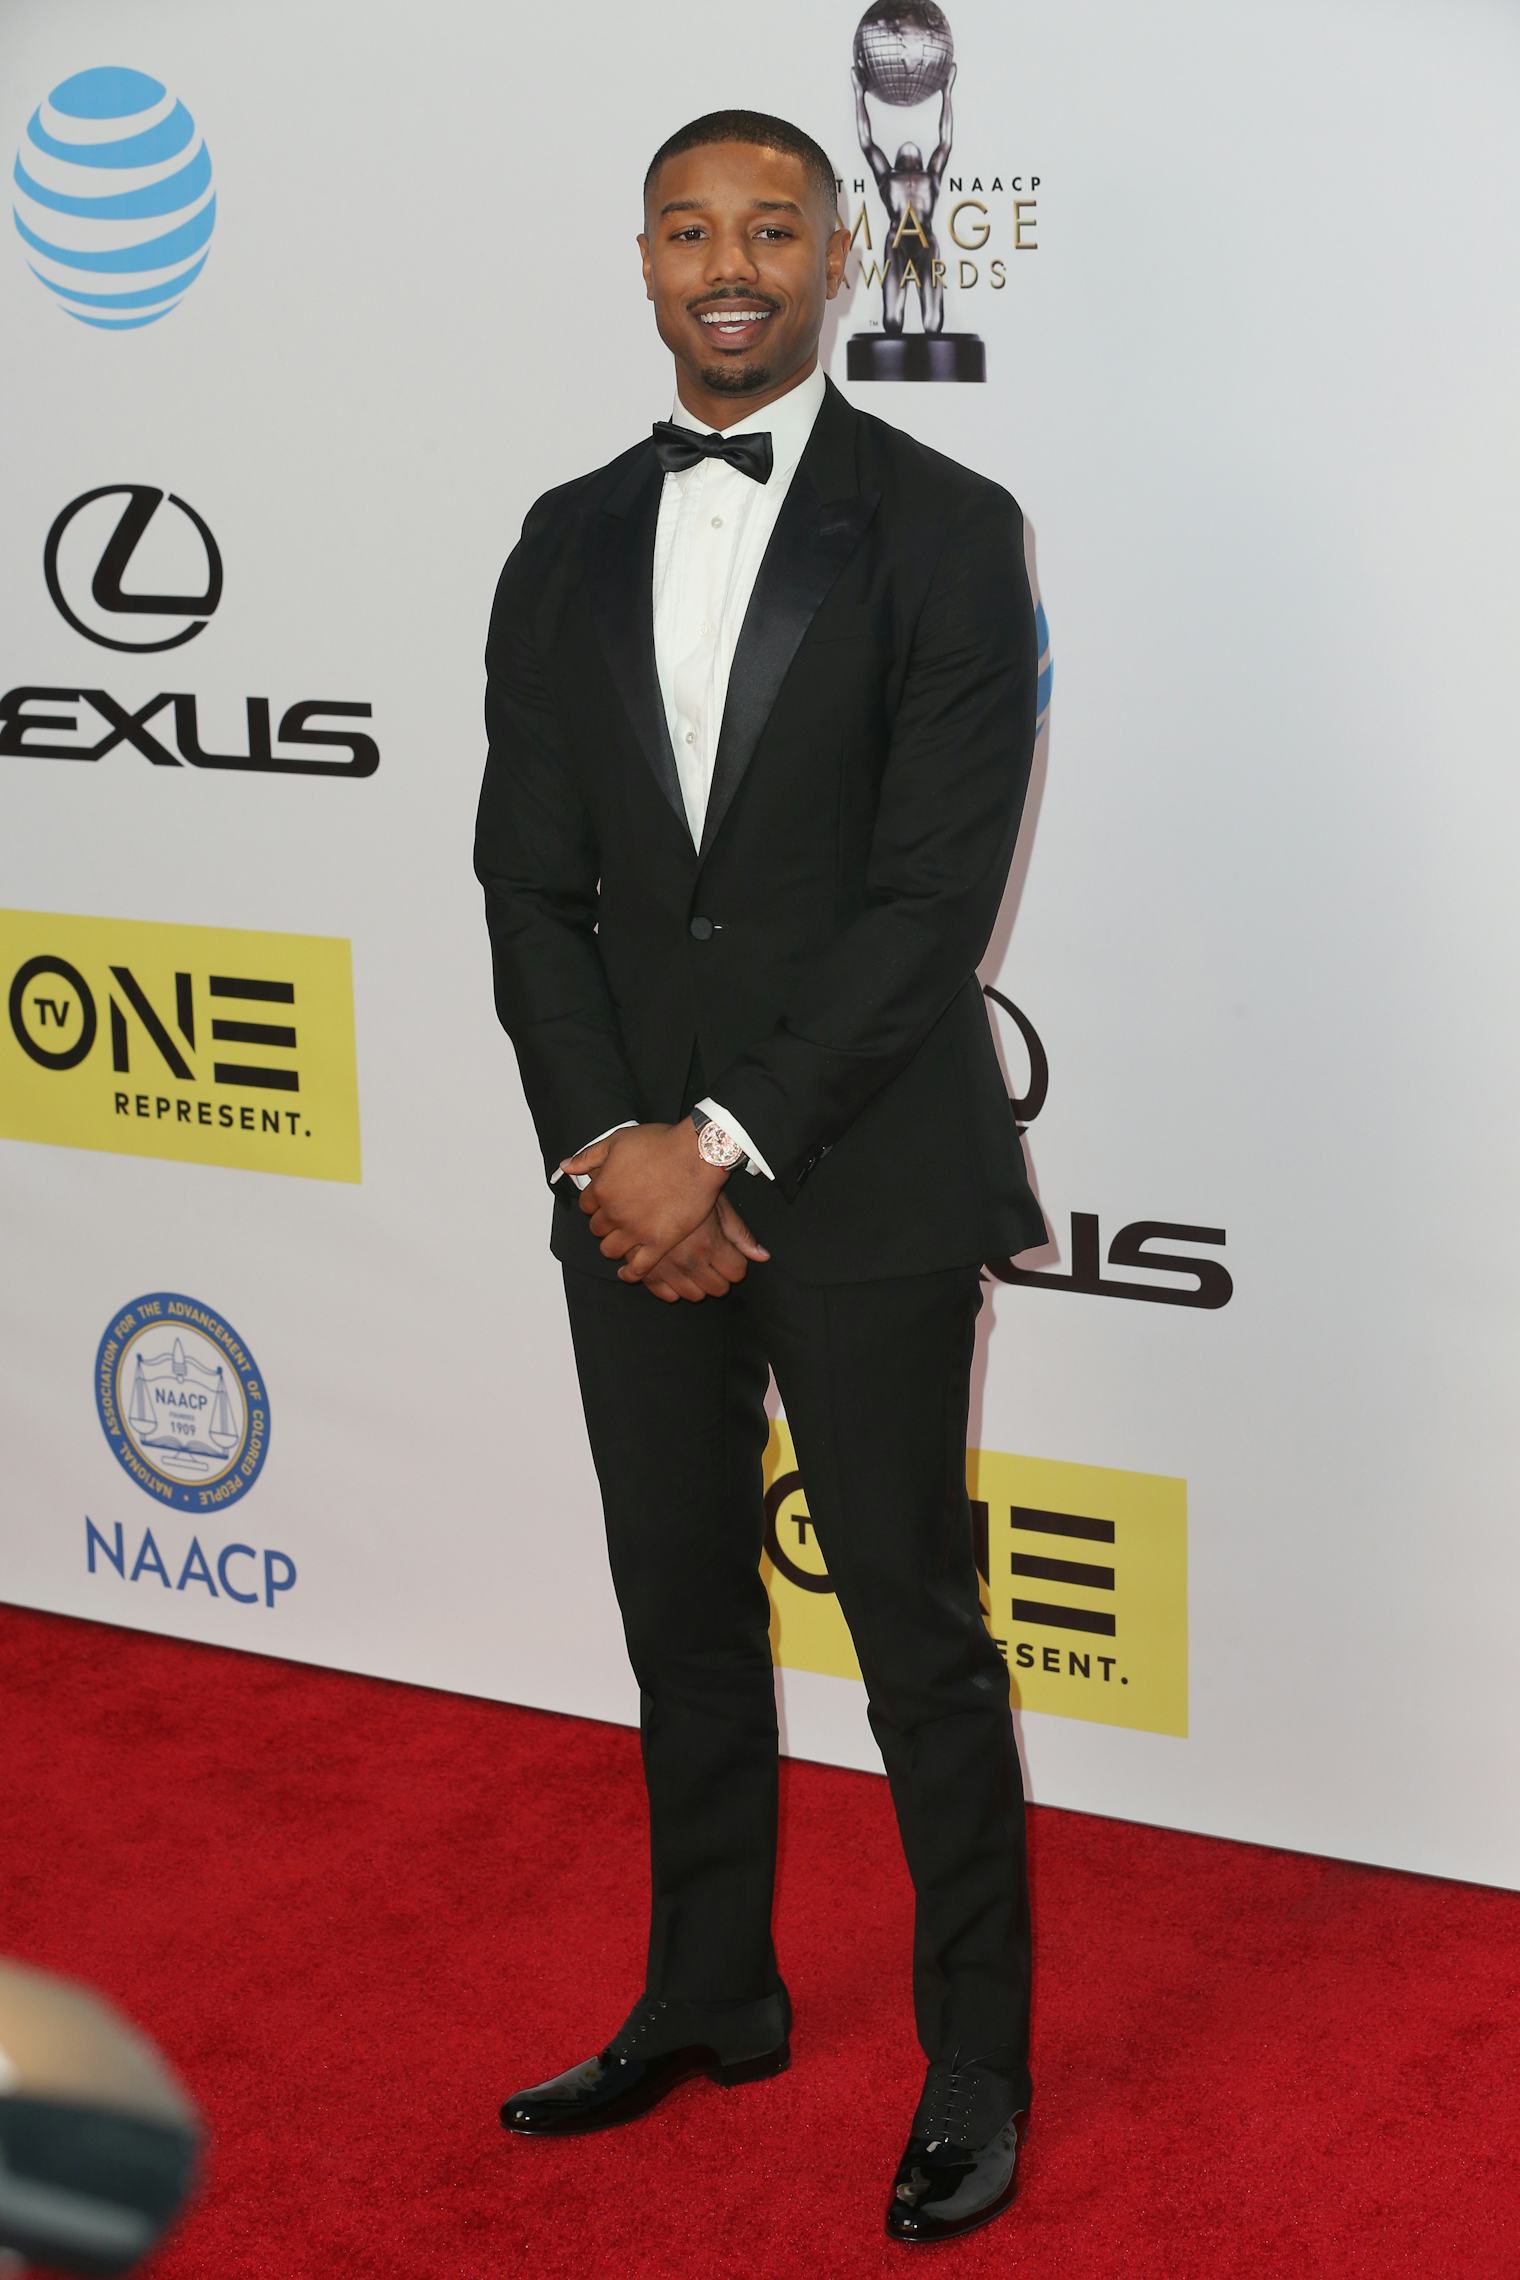 The Best Looks From The 2016 NAACP Image Awards Red Carpet — PHOTOS